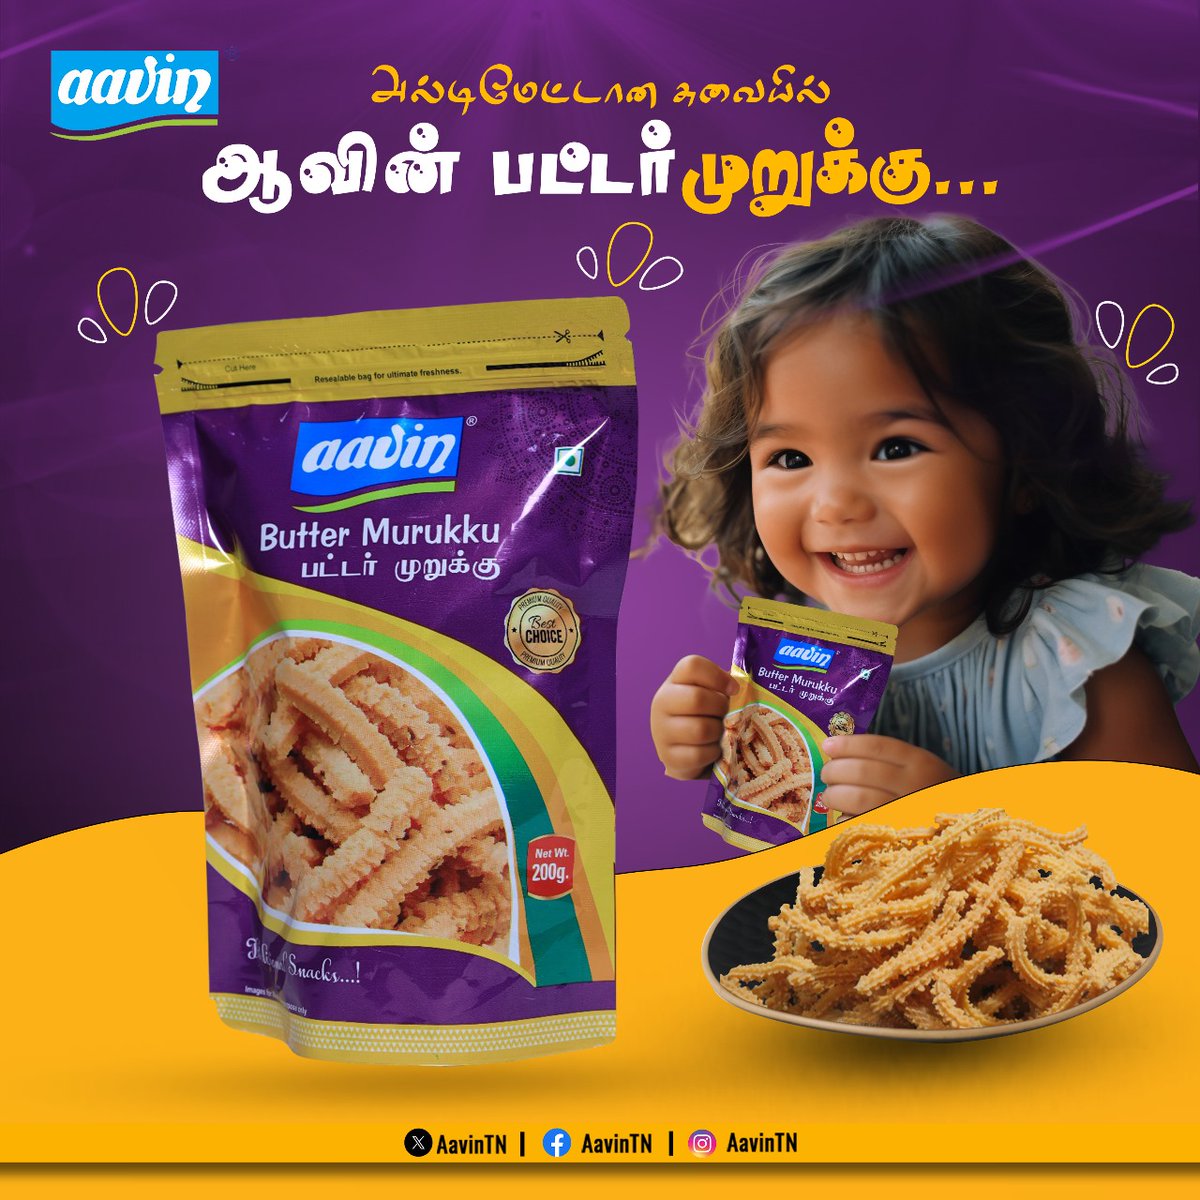 Crunchy delight with a buttery twist! Indulge in the irresistible goodness of Aavin Butter Murukku. Perfect for snack time cravings. #AavinButterMurukku #CrunchyDelight #SnackTimeTreat